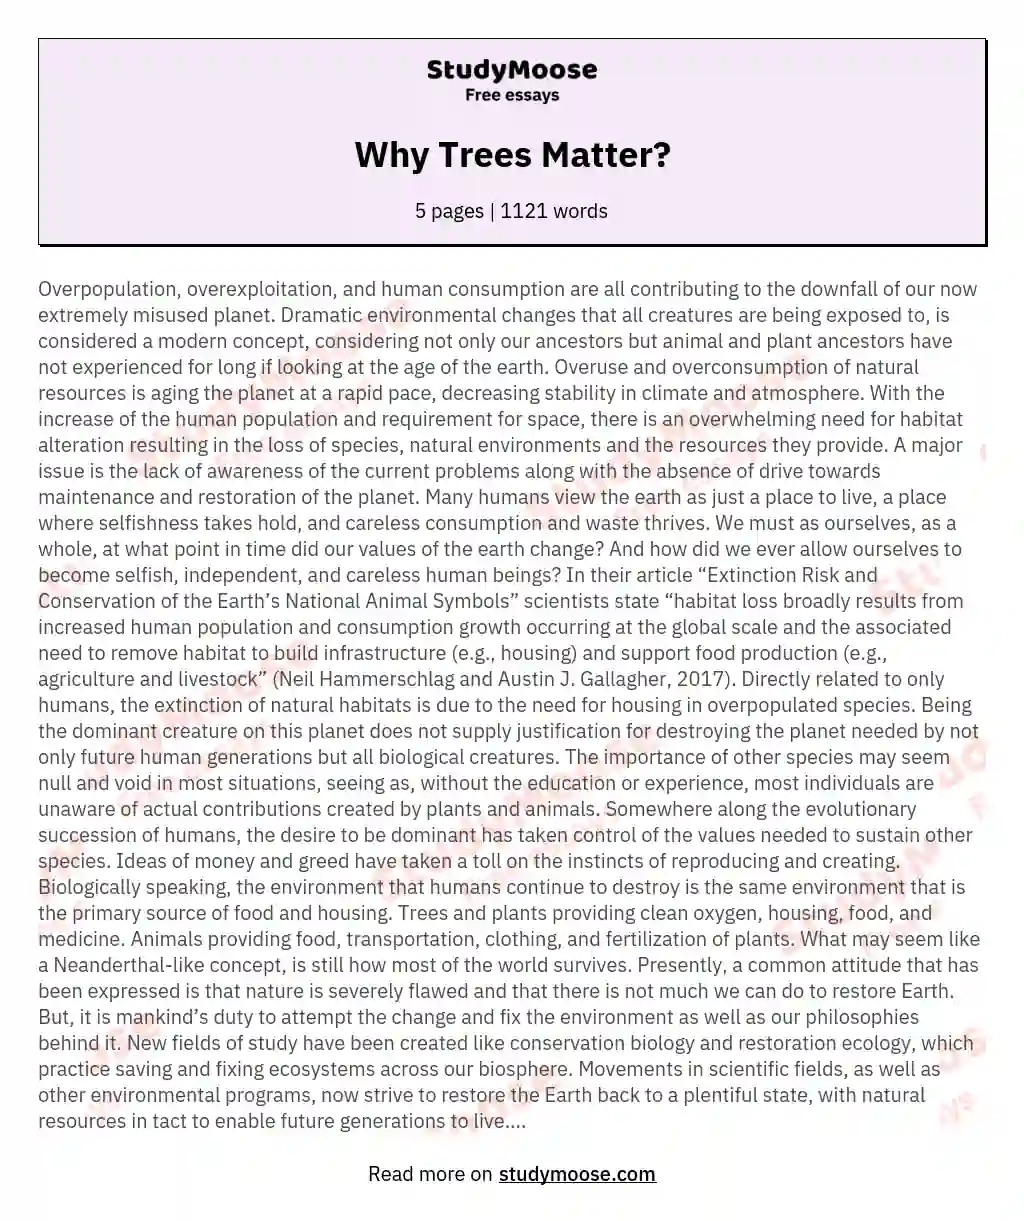 Why Trees Matter? essay